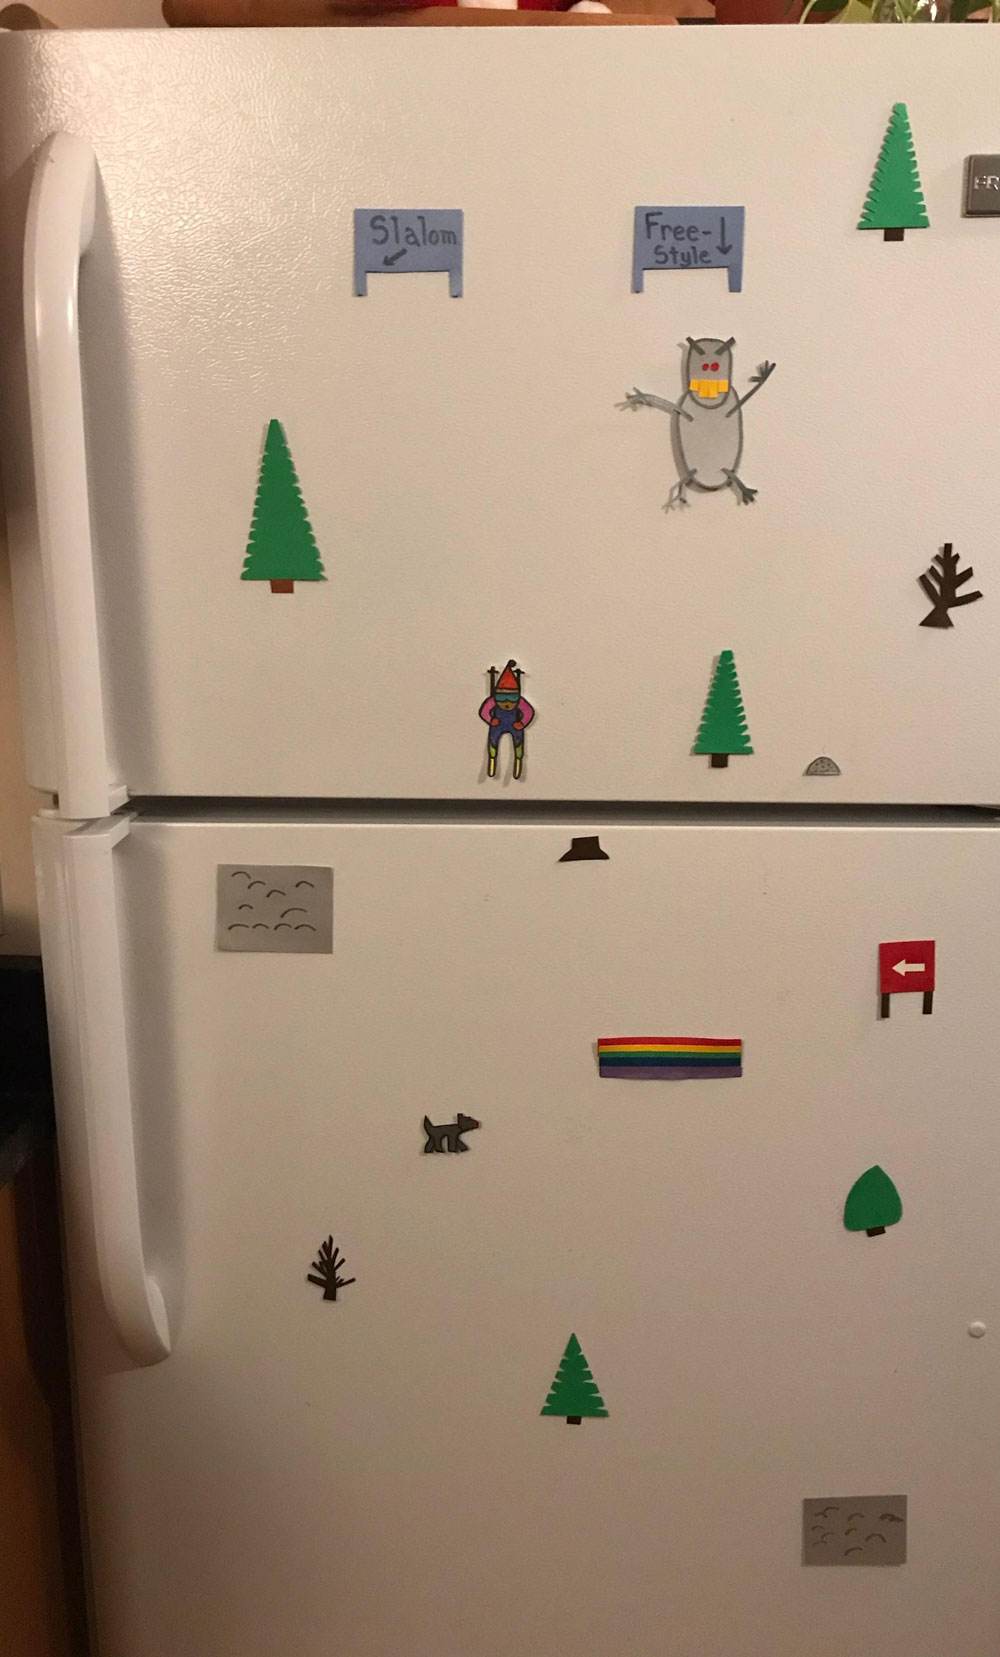 My brother decorated his fridge for the holidays